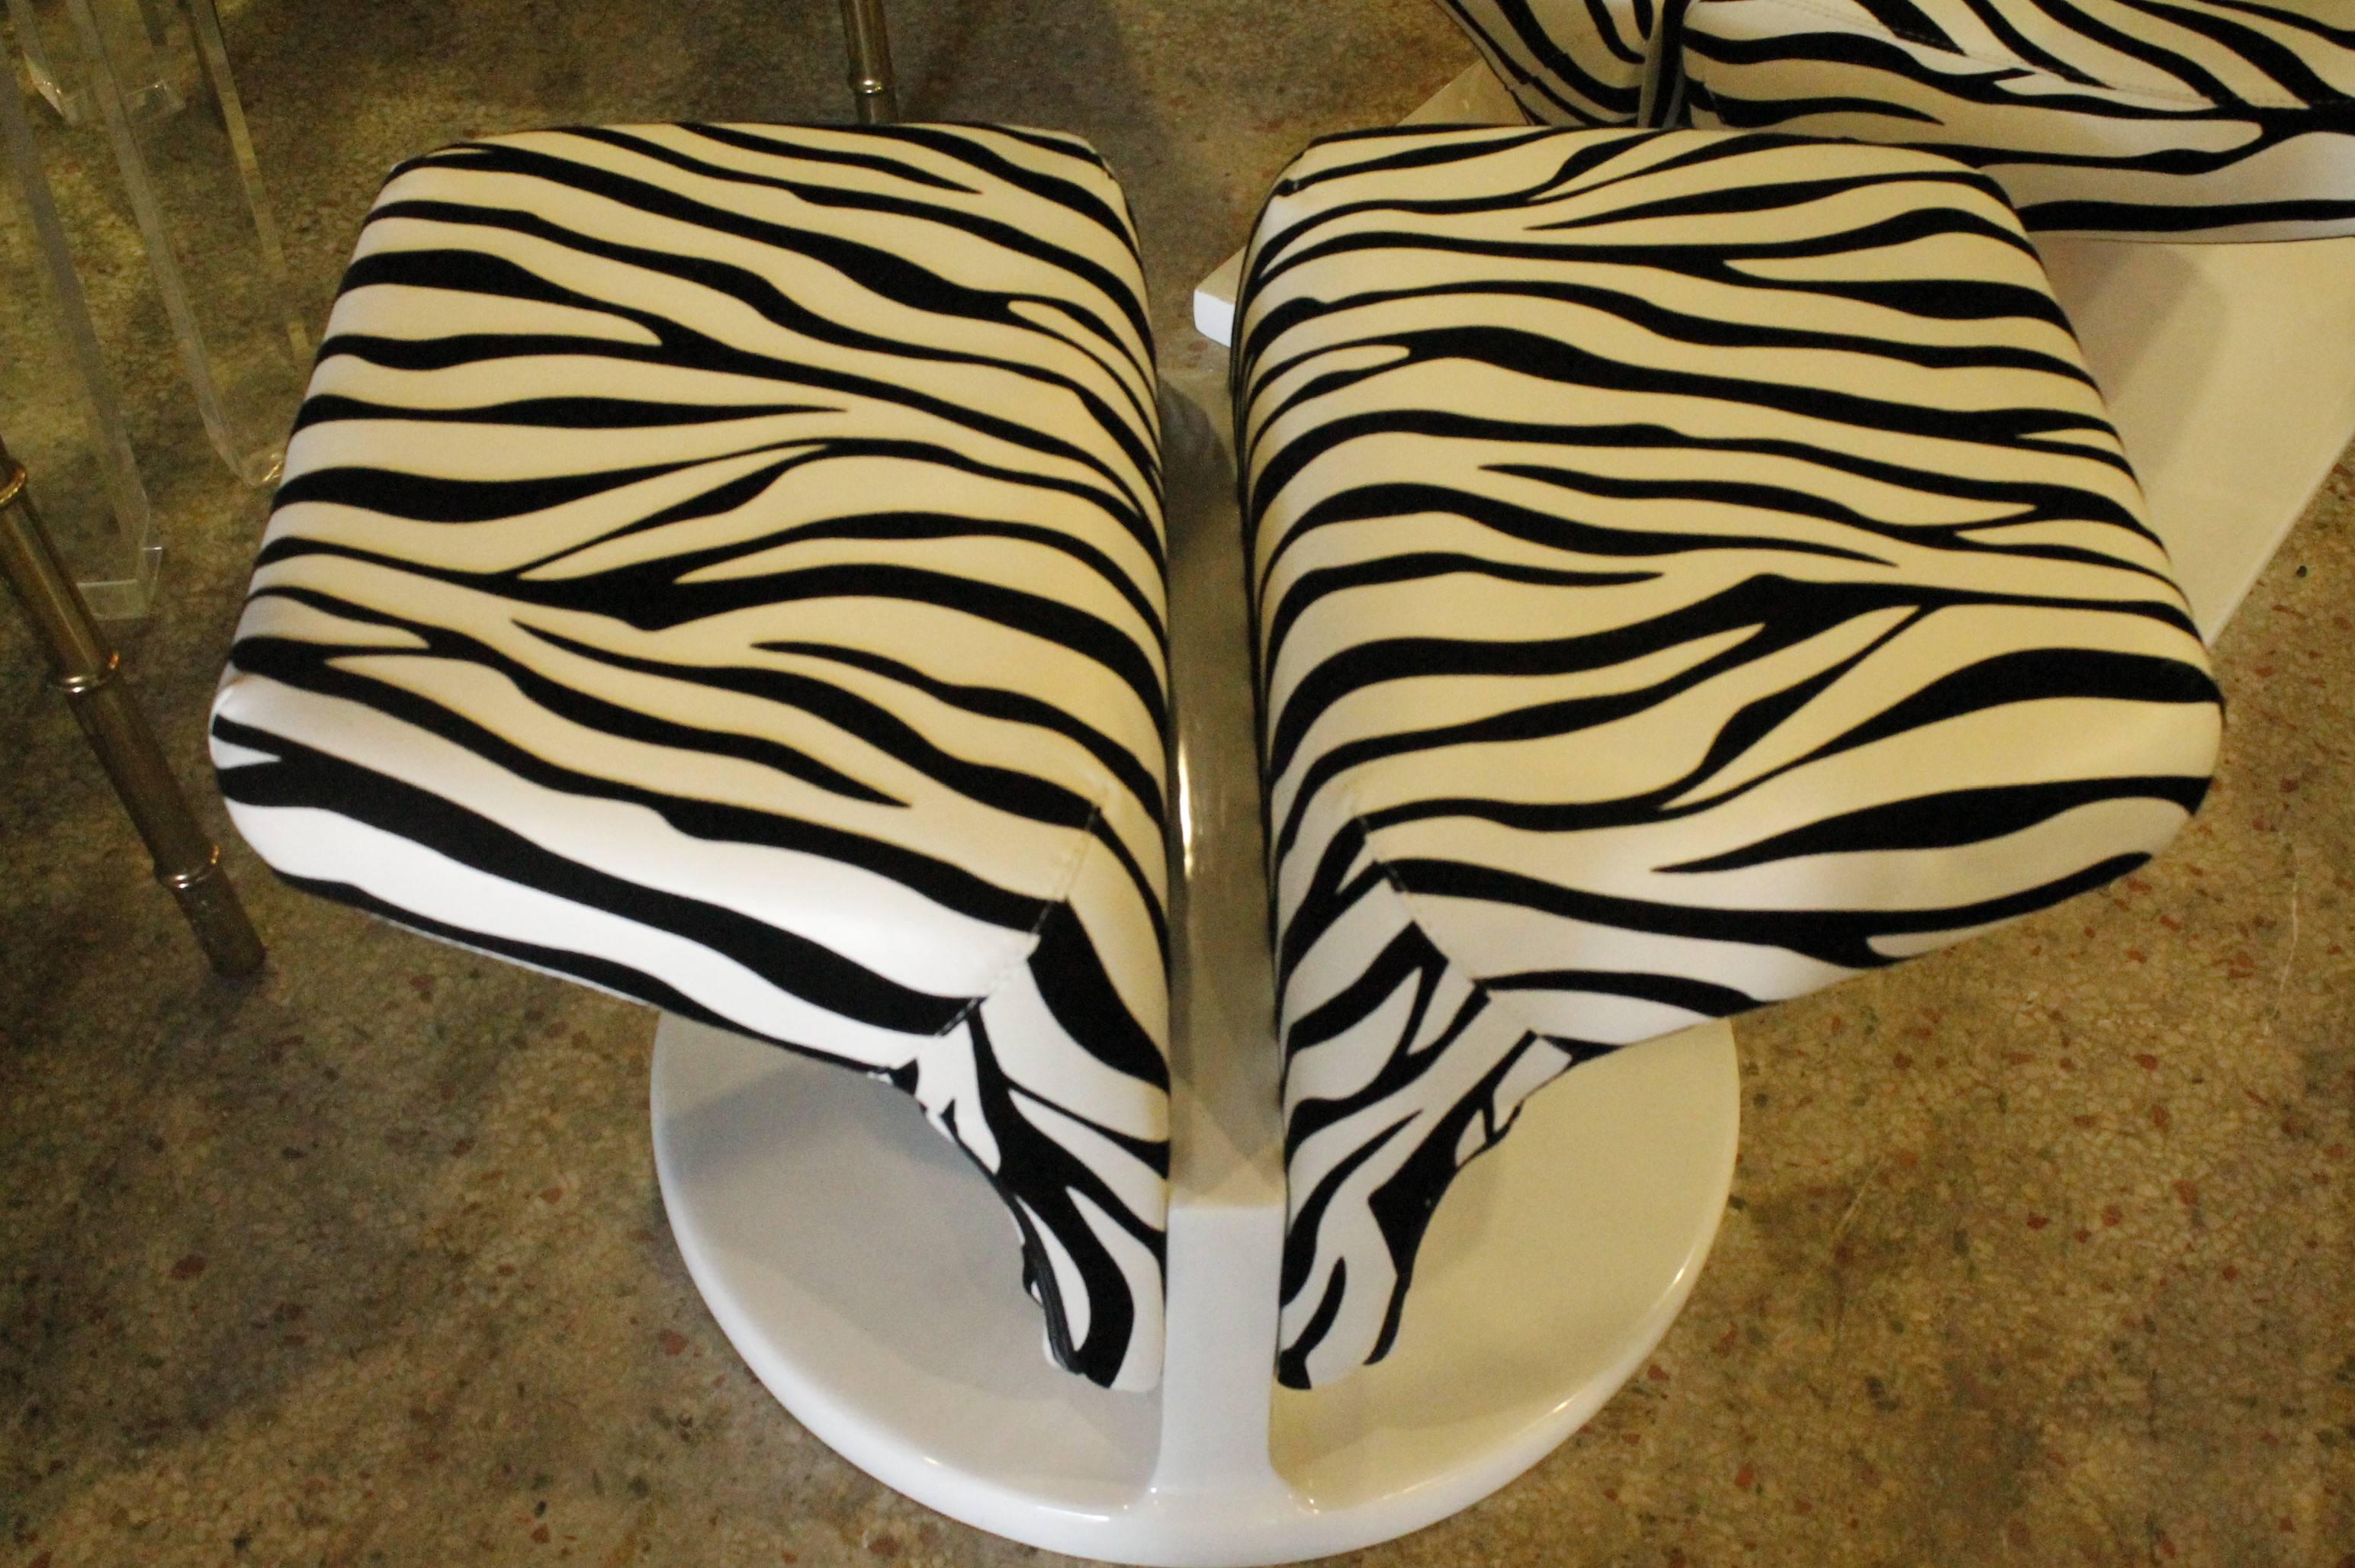 Lovely Pierre Paulin Ribbon style chair and footstool. Upholstery is newer seems like a white leather with a raised zebra stripe in black suede. This chair and footstool are very heavy.
Chair dimensions are below.
Footstool dimensions are as